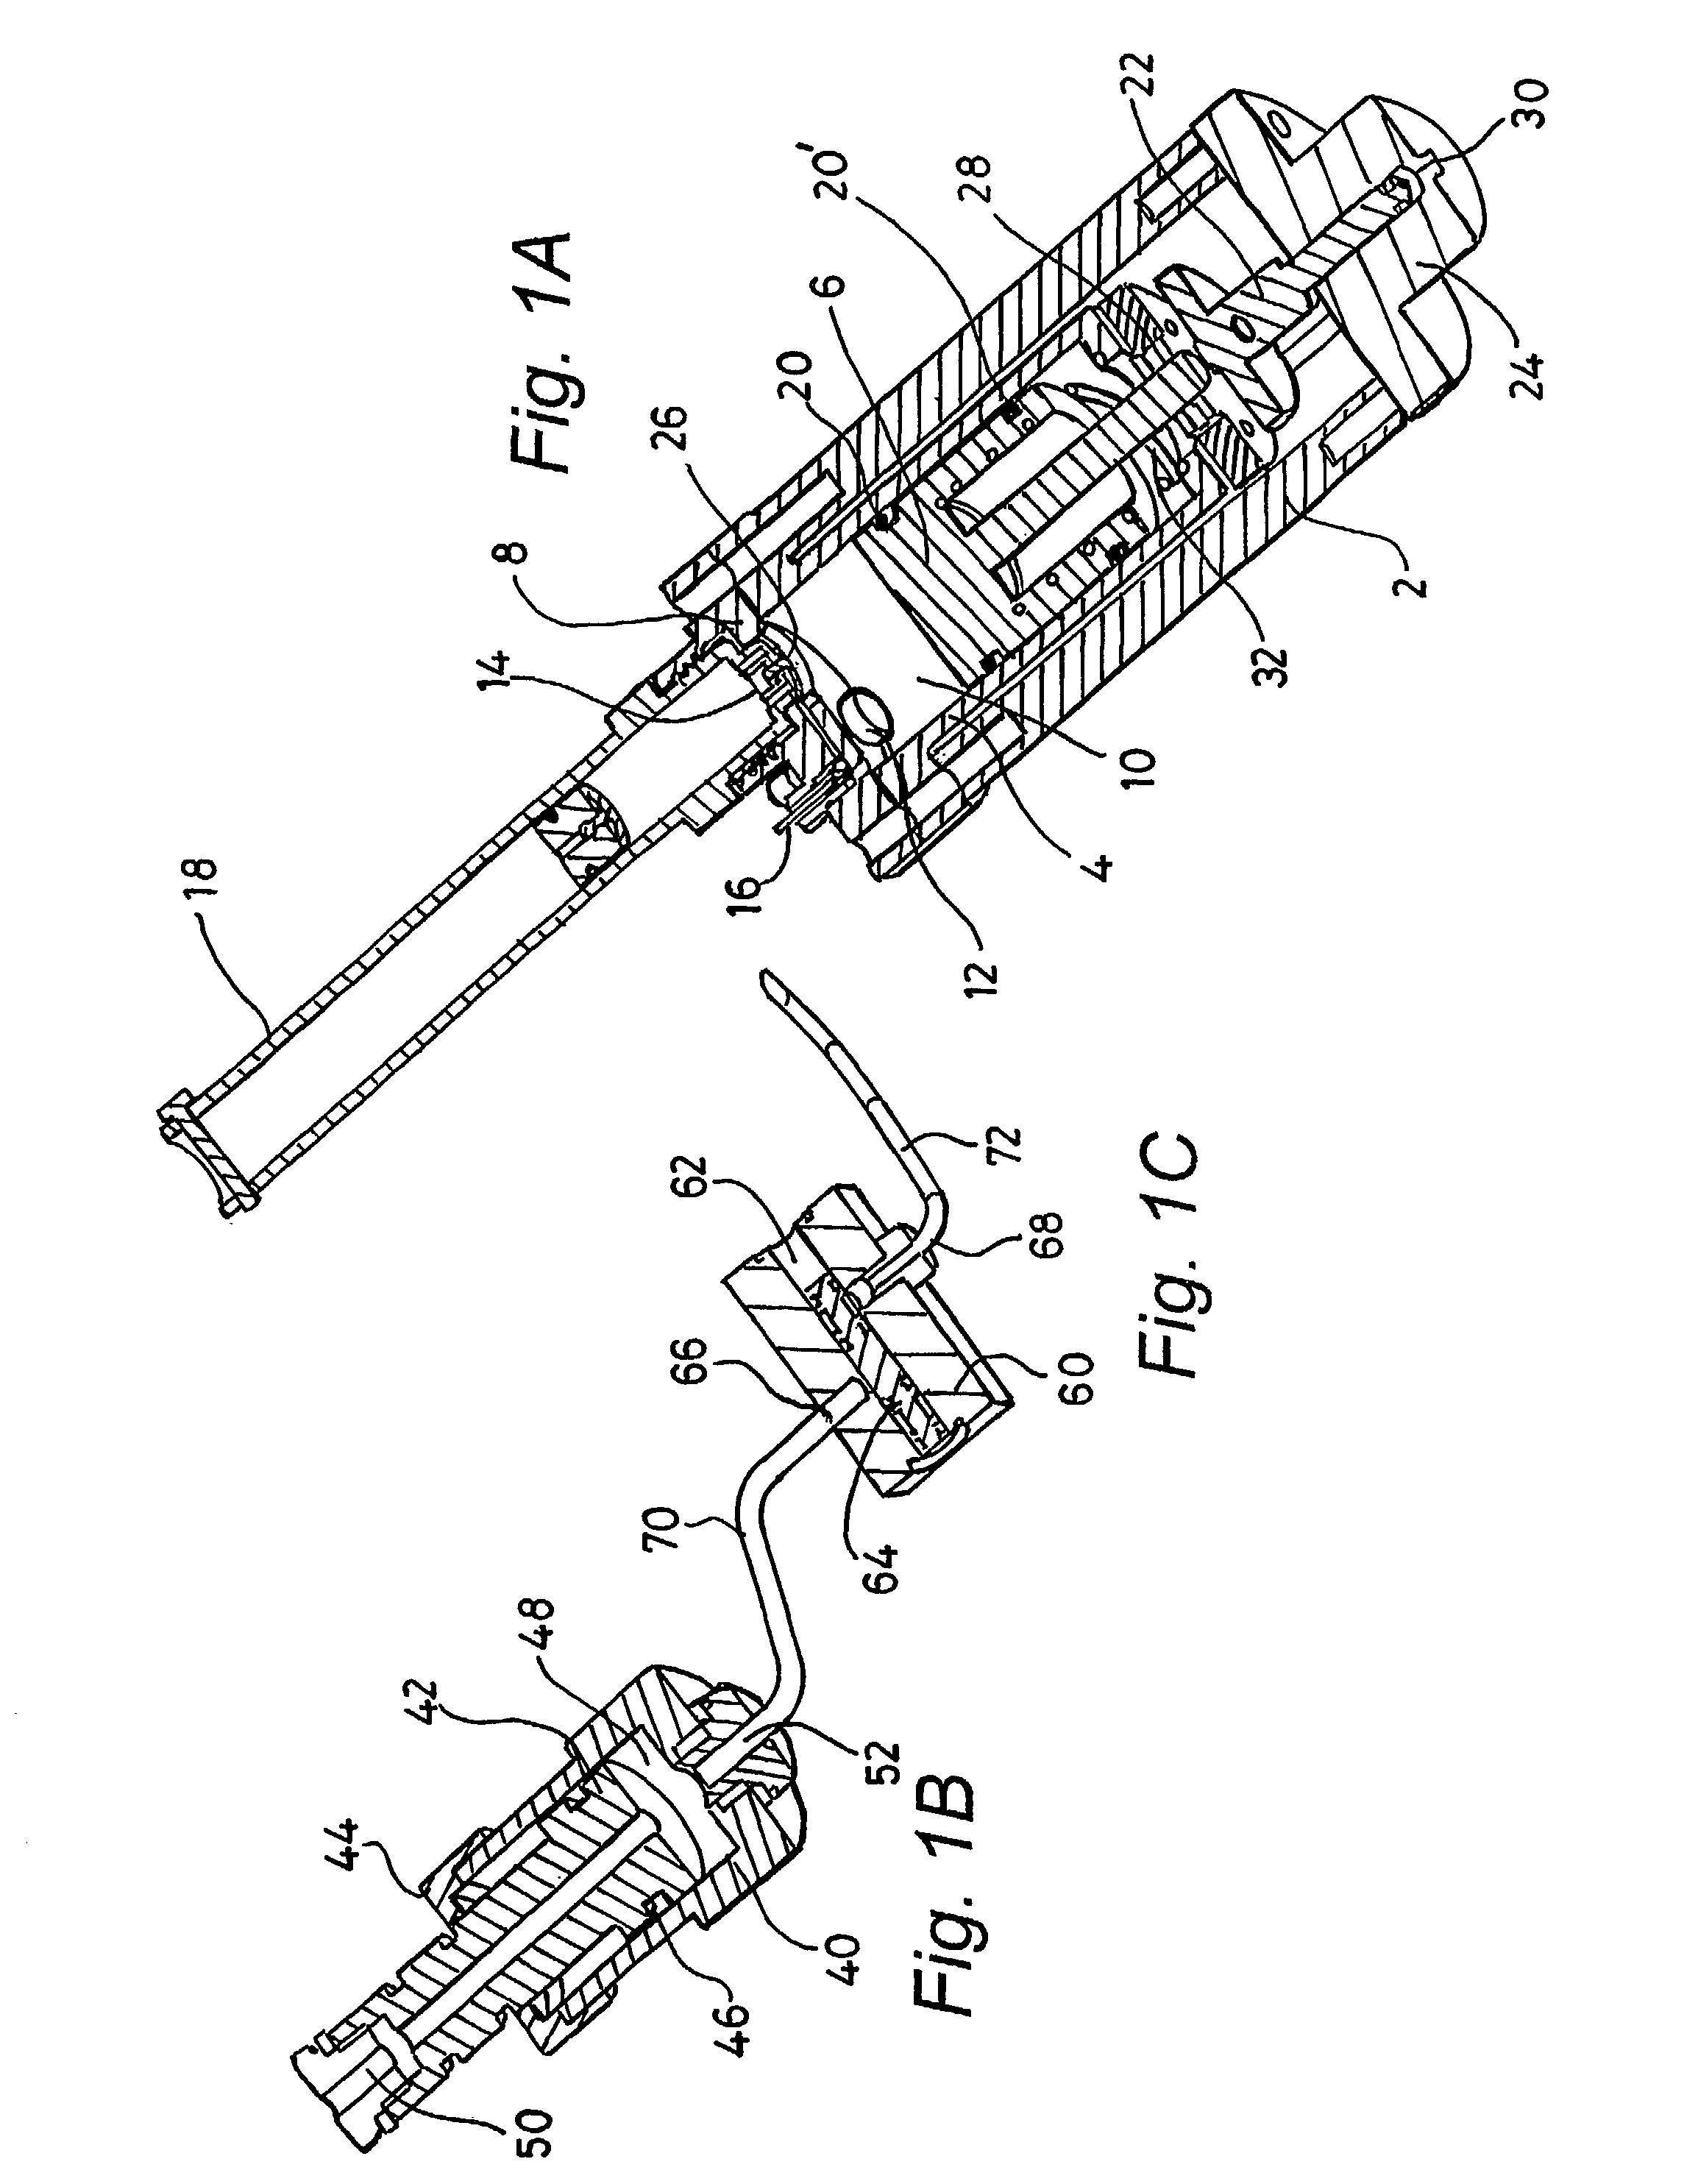 Portable device for delivering medicaments and the like